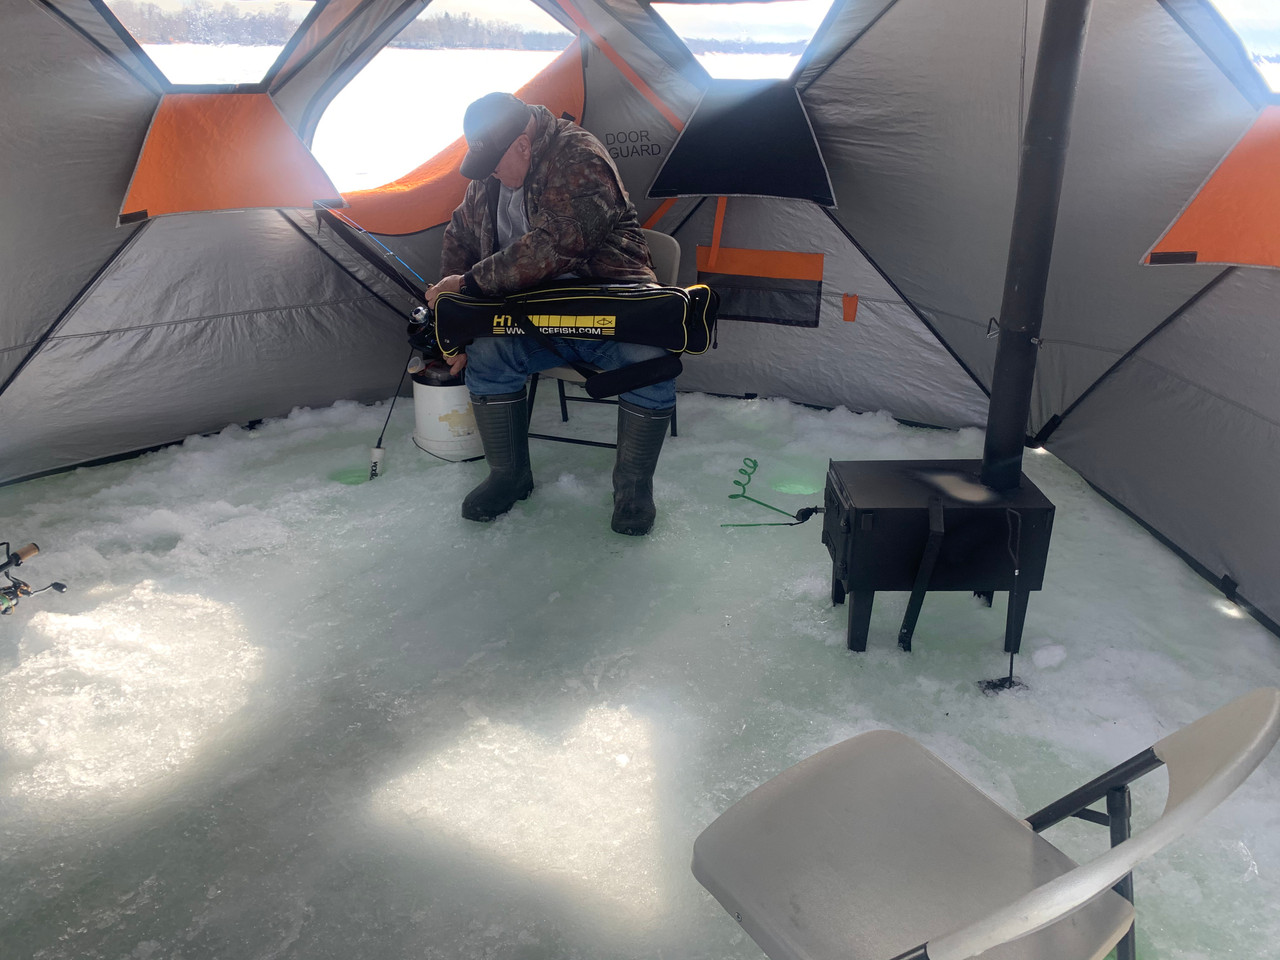 Nordic Legend Aurora Ice Gear Floating Ice Fishing Suit